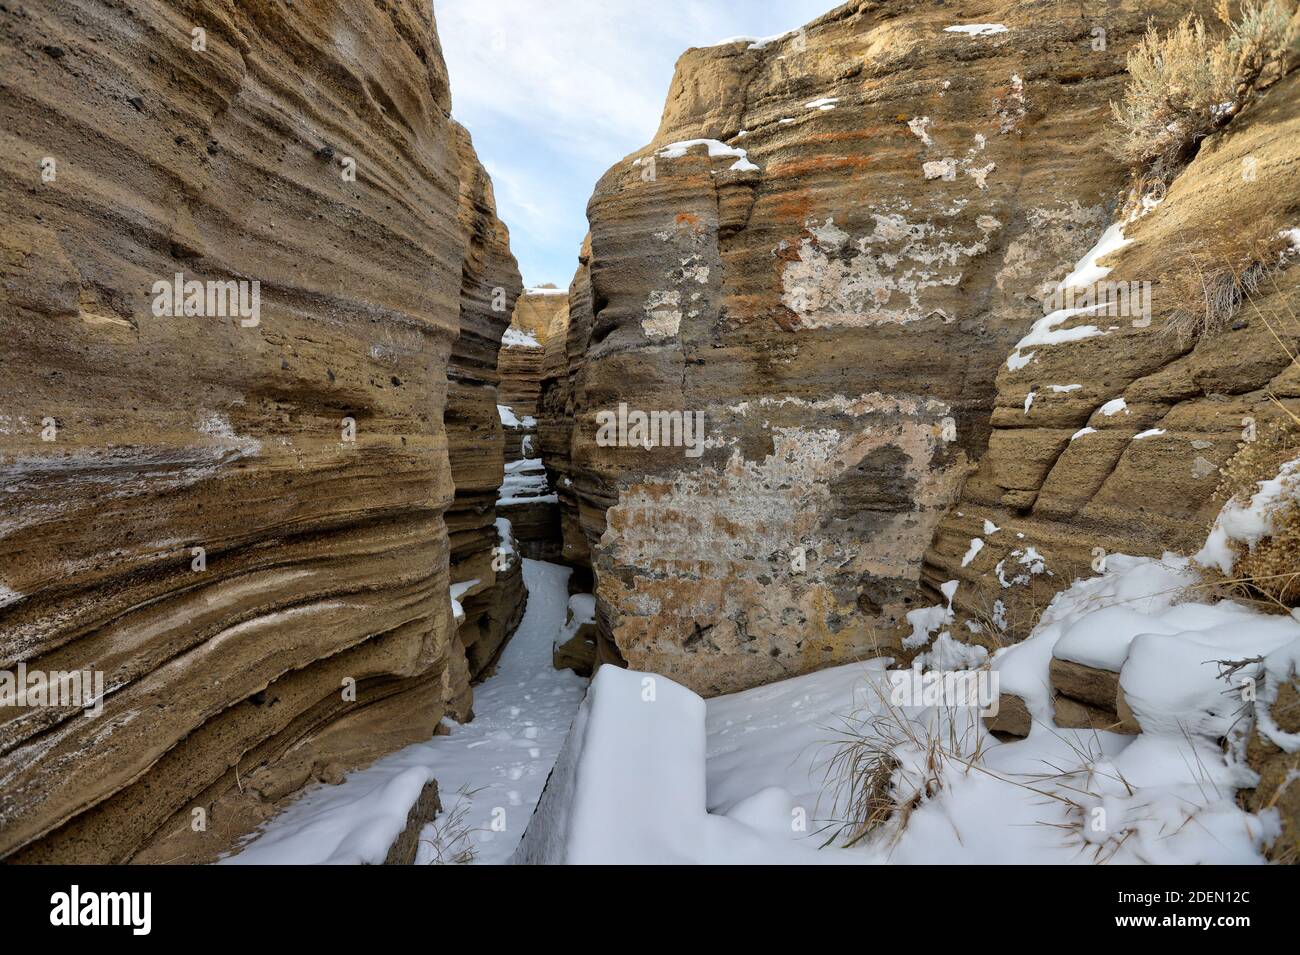 LEE VINING, CALIFORNIA, UNITED STATES - Nov 14, 2020: The Black Point  Fissures slot canyon area covered in a light winter snow Stock Photo - Alamy